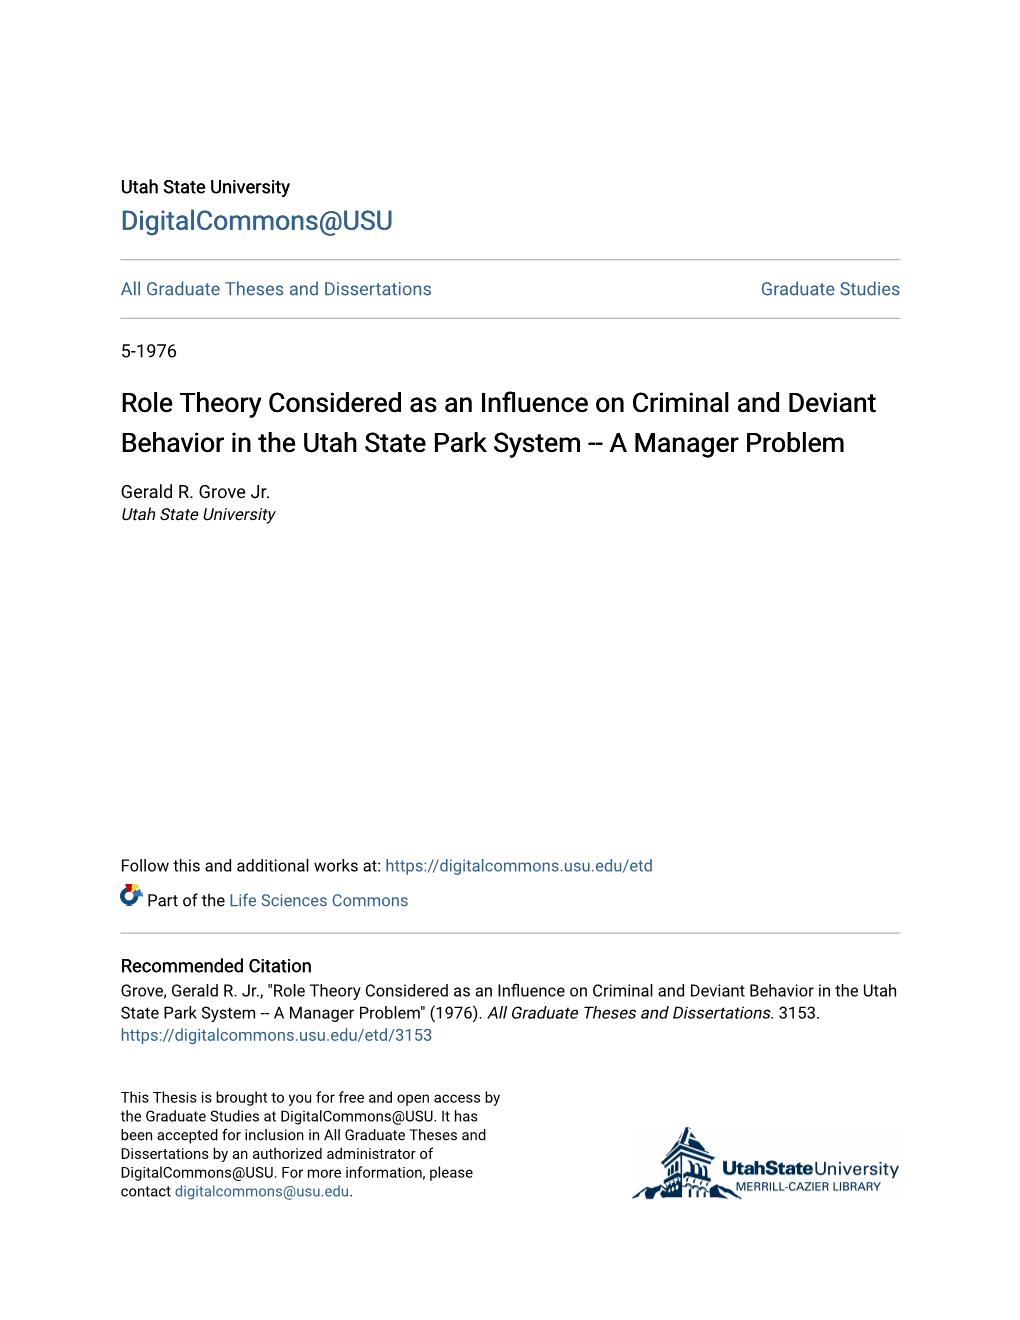 Role Theory Considered As an Influence on Criminal and Deviant Behavior in the Utah State Park System -- a Manager Problem